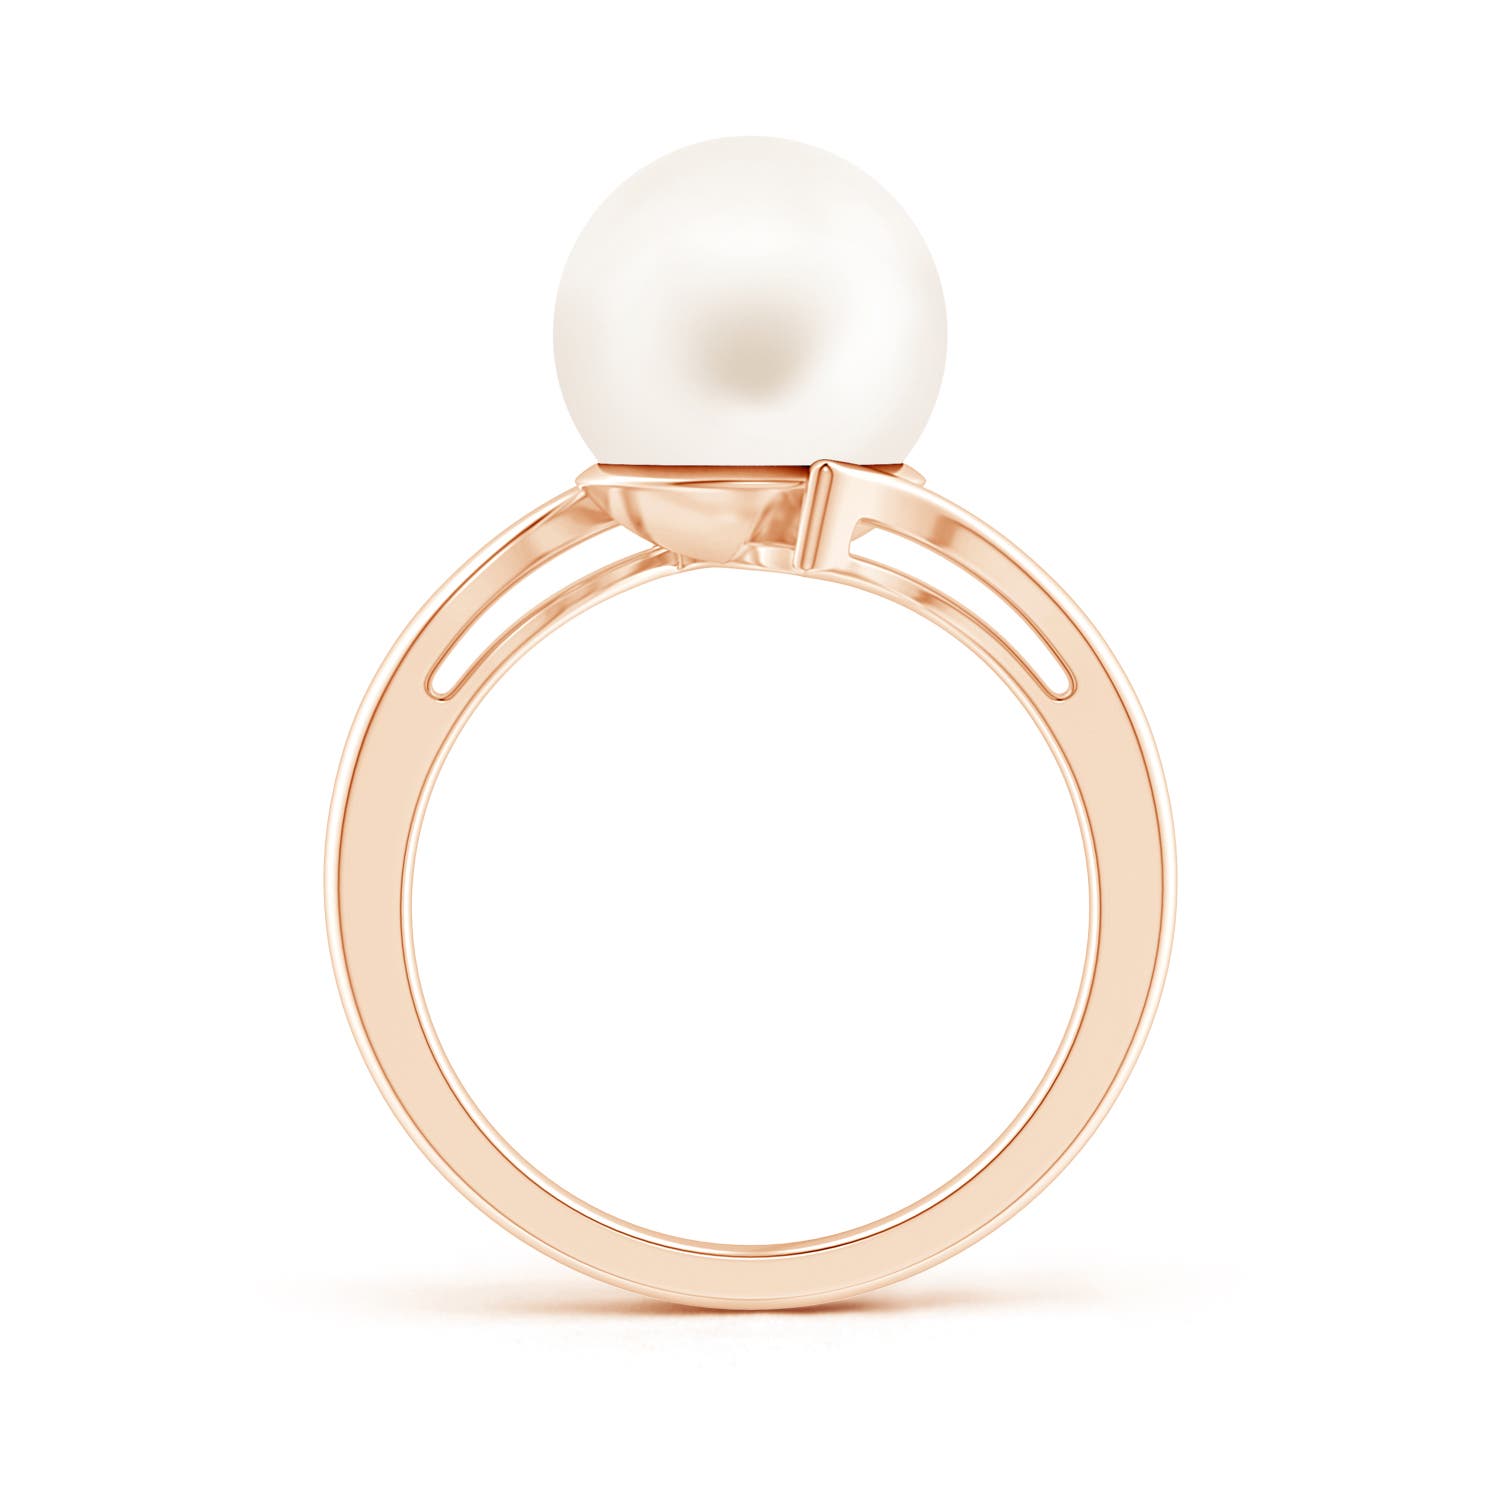 AA / 7.2 CT / 14 KT Rose Gold